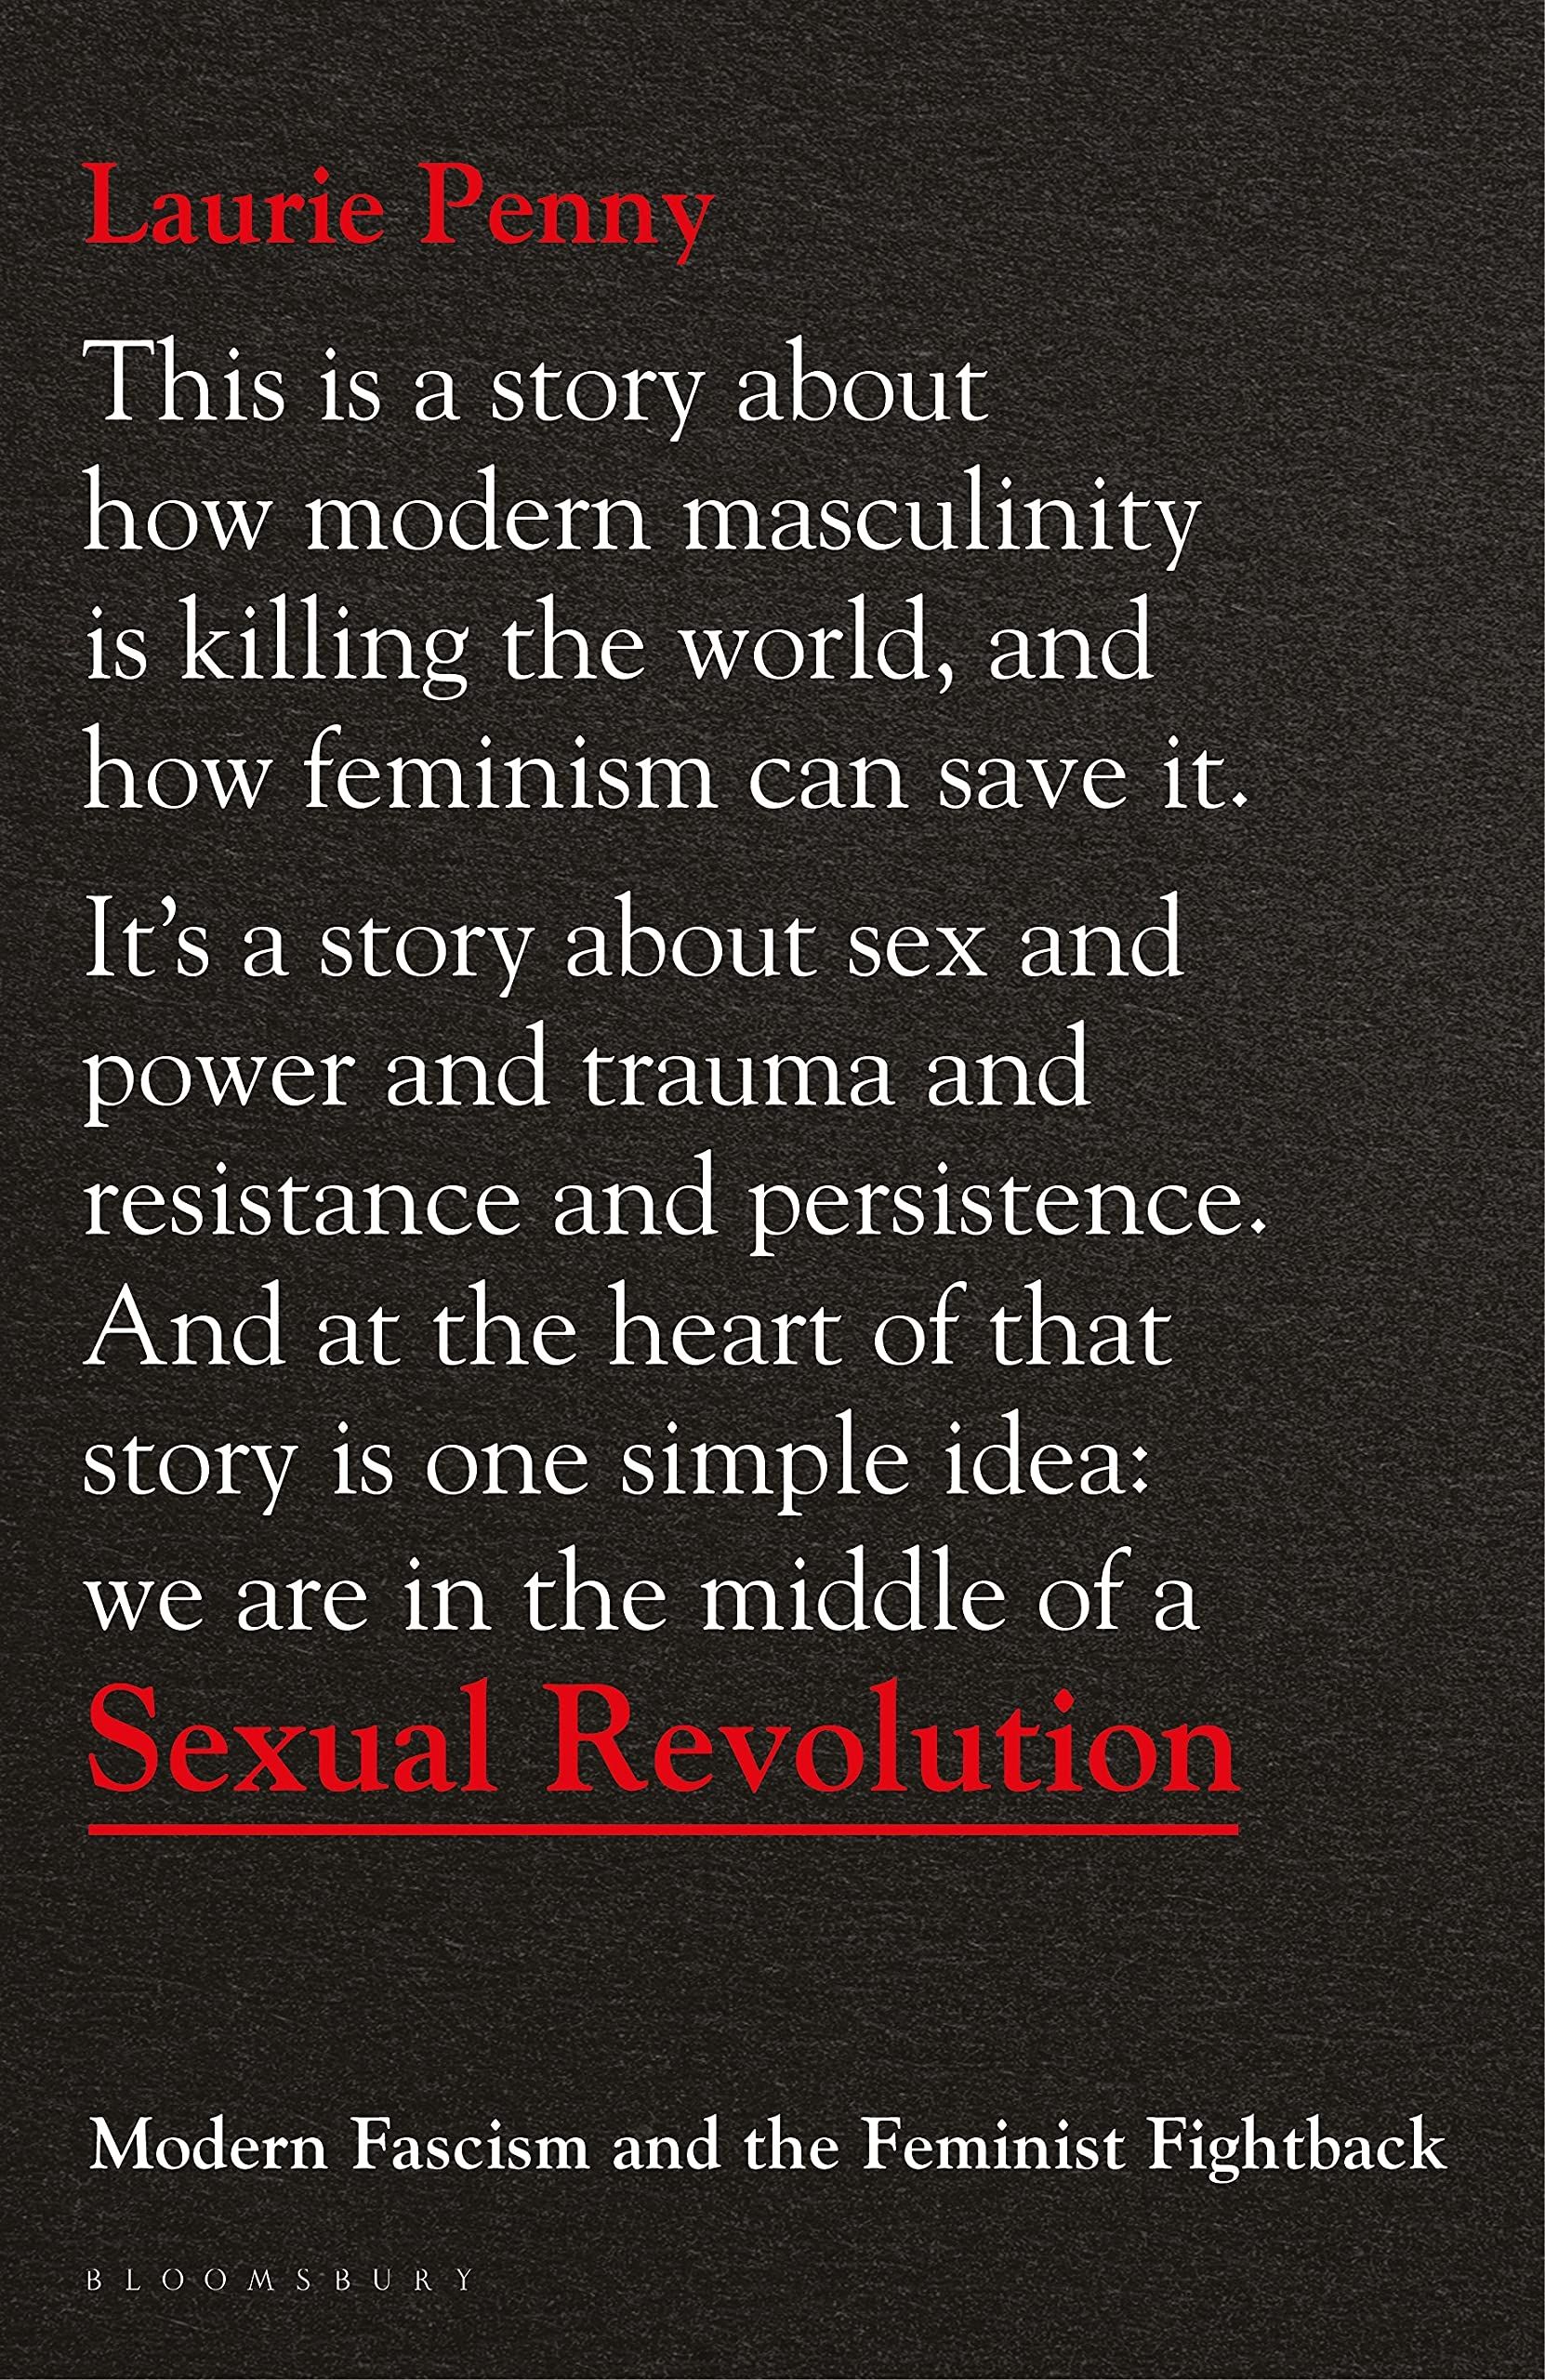 Sexual Revolution : Modern Fascism and the Feminist Fightback